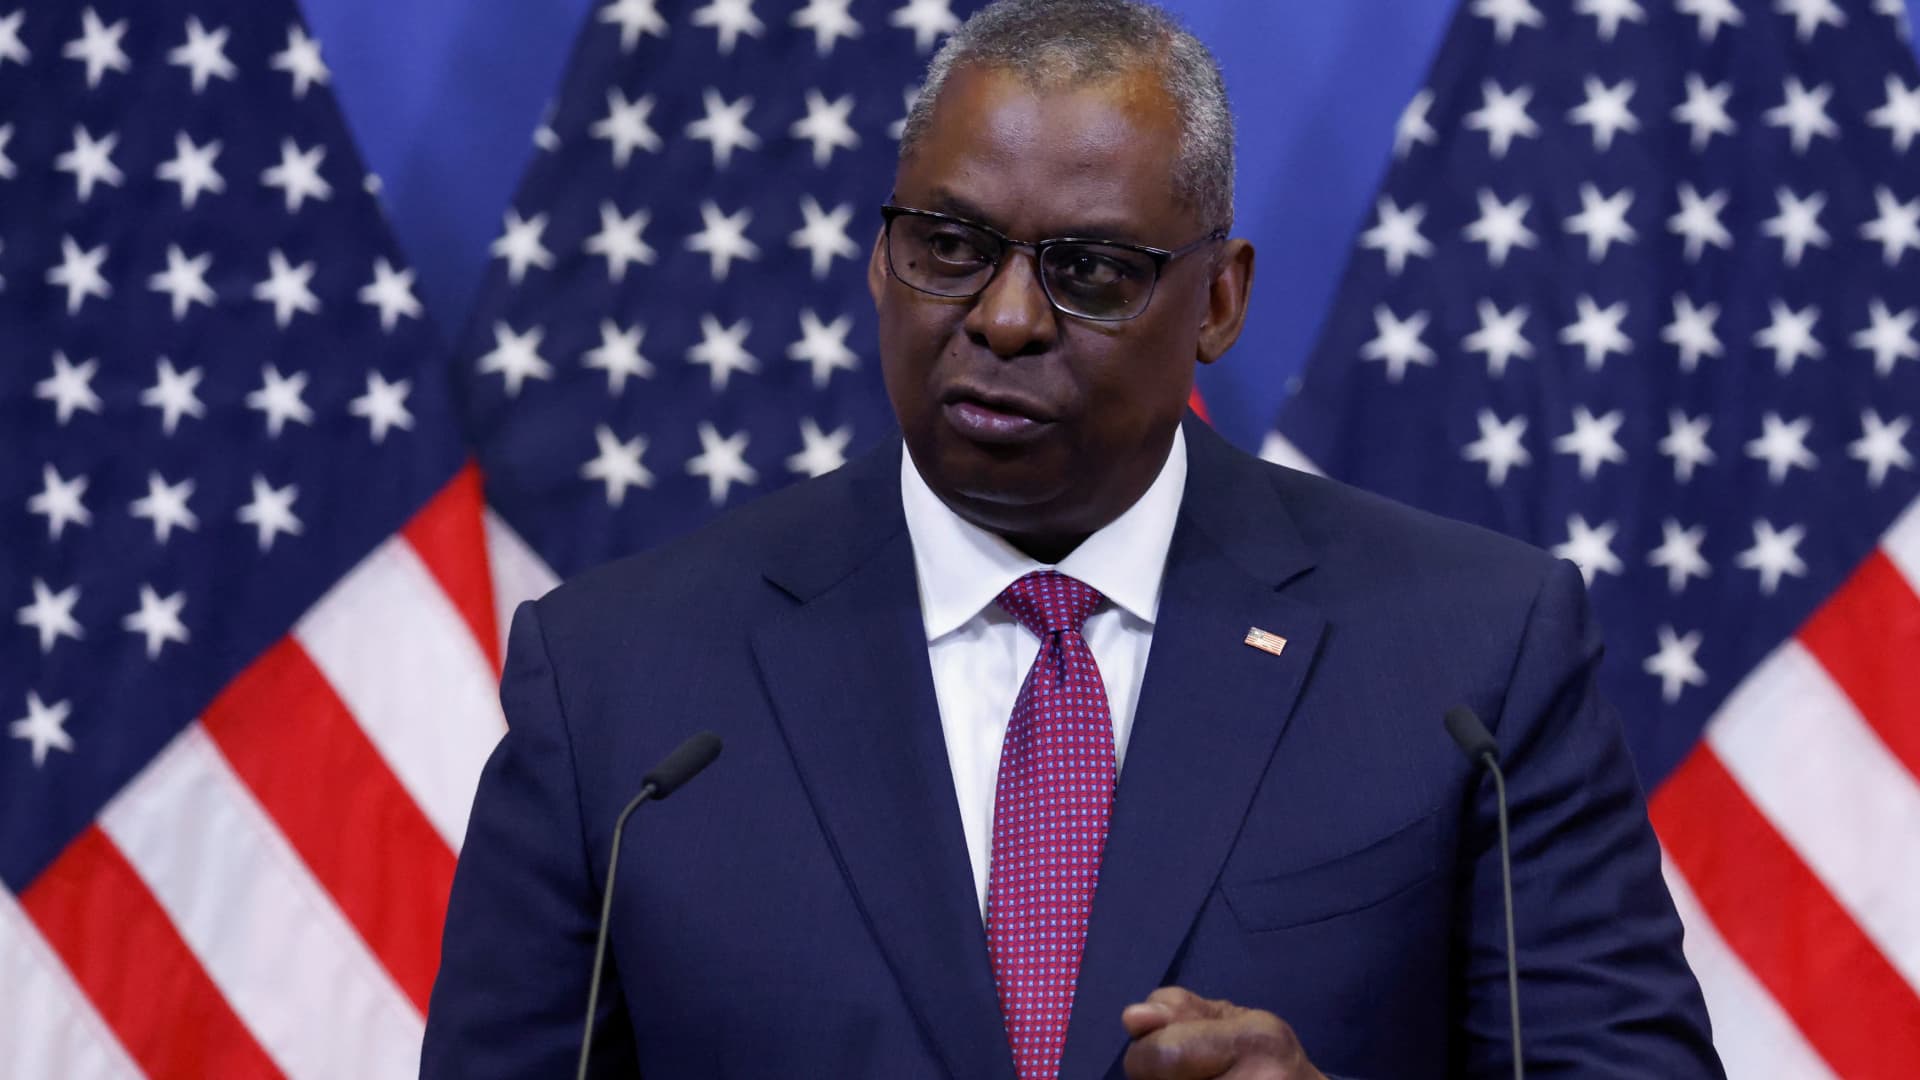 U.S. Defense Secretary Lloyd Austin holds a news conference with U.S. General Mark Milley, chairman of the Joint Chiefs of Staff, after a meeting of the Ukraine Defence Contact group at the NATO headquarters in Brussels, Belgium June 15, 2022.